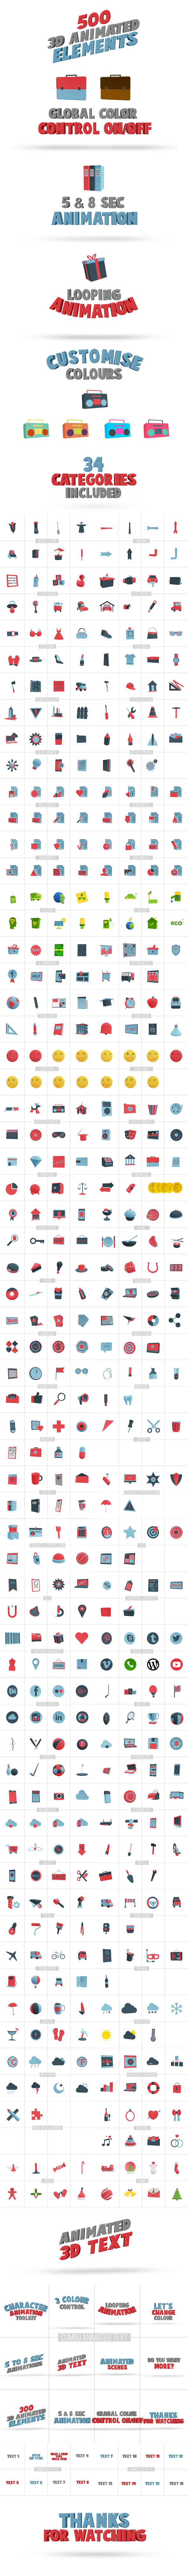 3D Animated Elements Library - 7